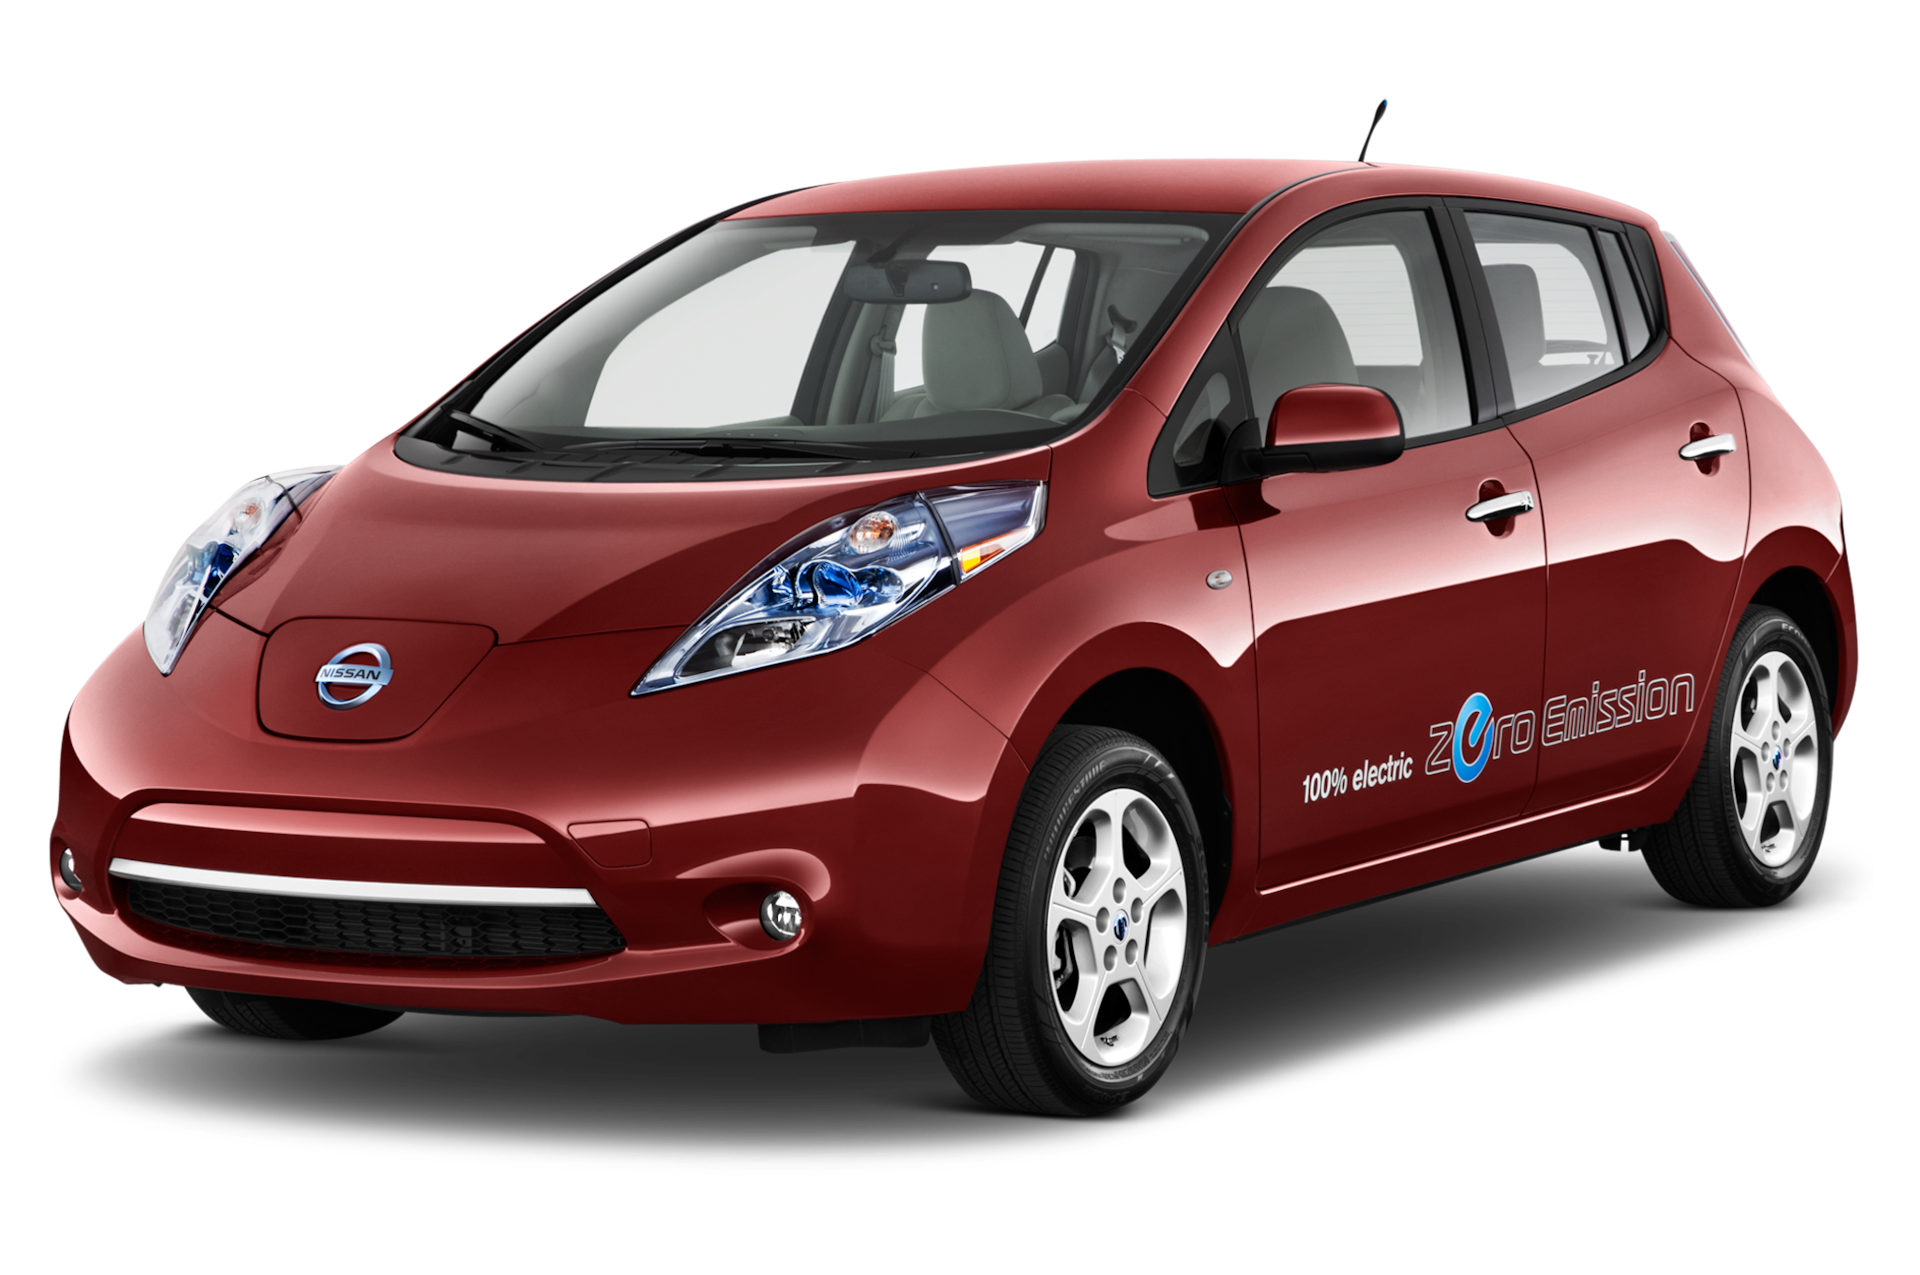 2012 Nissan LEAF Prices, Reviews, and Photos - MotorTrend